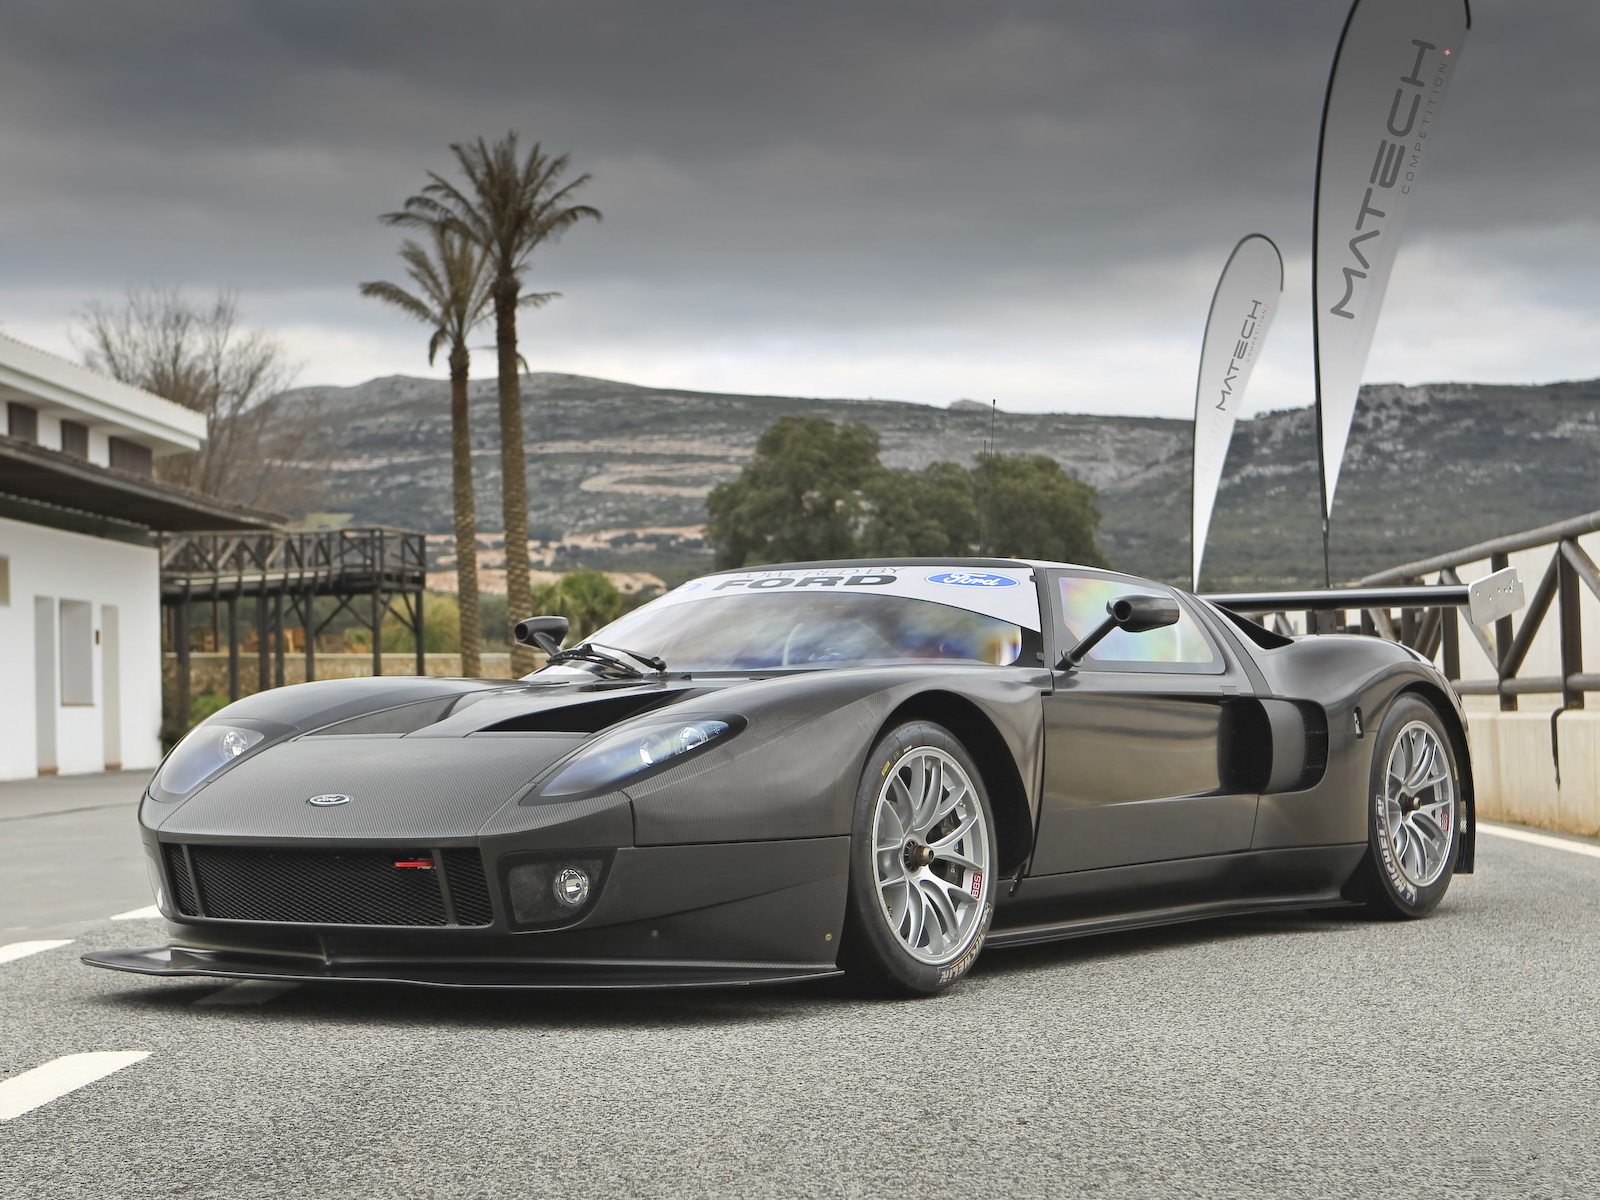 2007, Matech, Racing, Ford, Gt, Supercar, Supercars, Race, Racing, Ford gt, G t Wallpaper